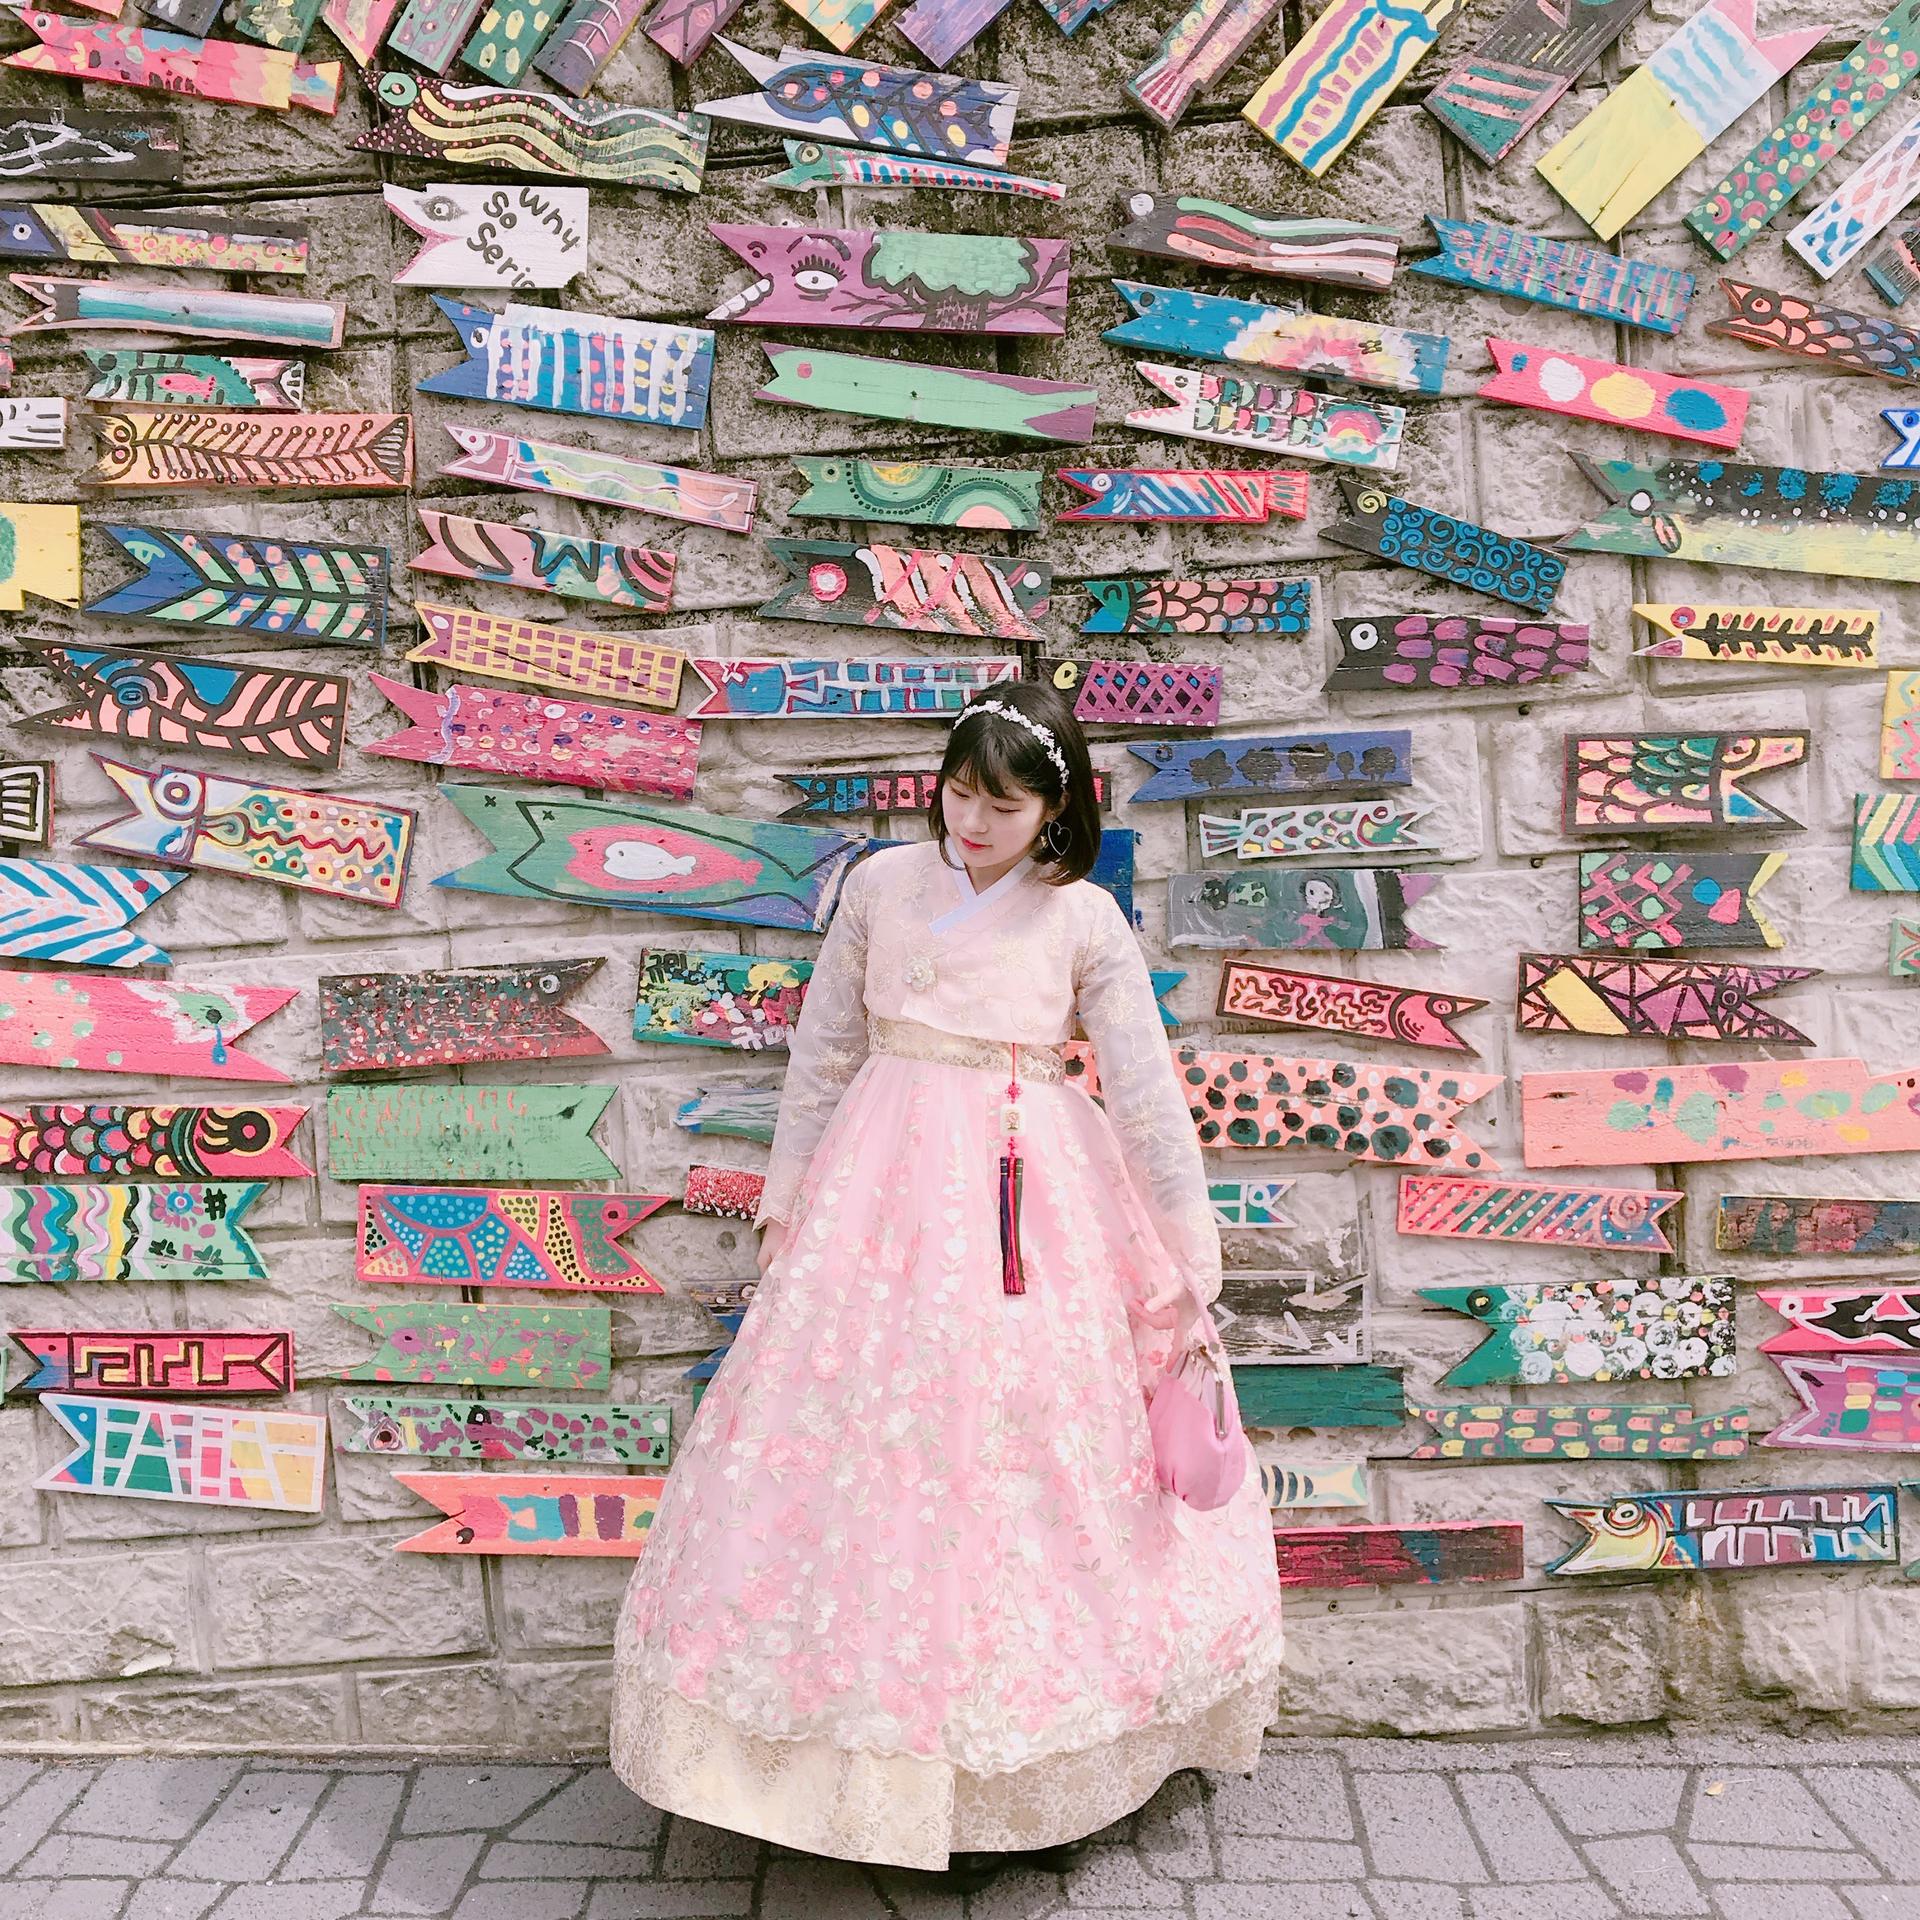 A pink 한복 dress for rent at a clothing shop in Busan. The dress has traditional 한복 sleeves and is shown in a temple. Textile and fashion photography.